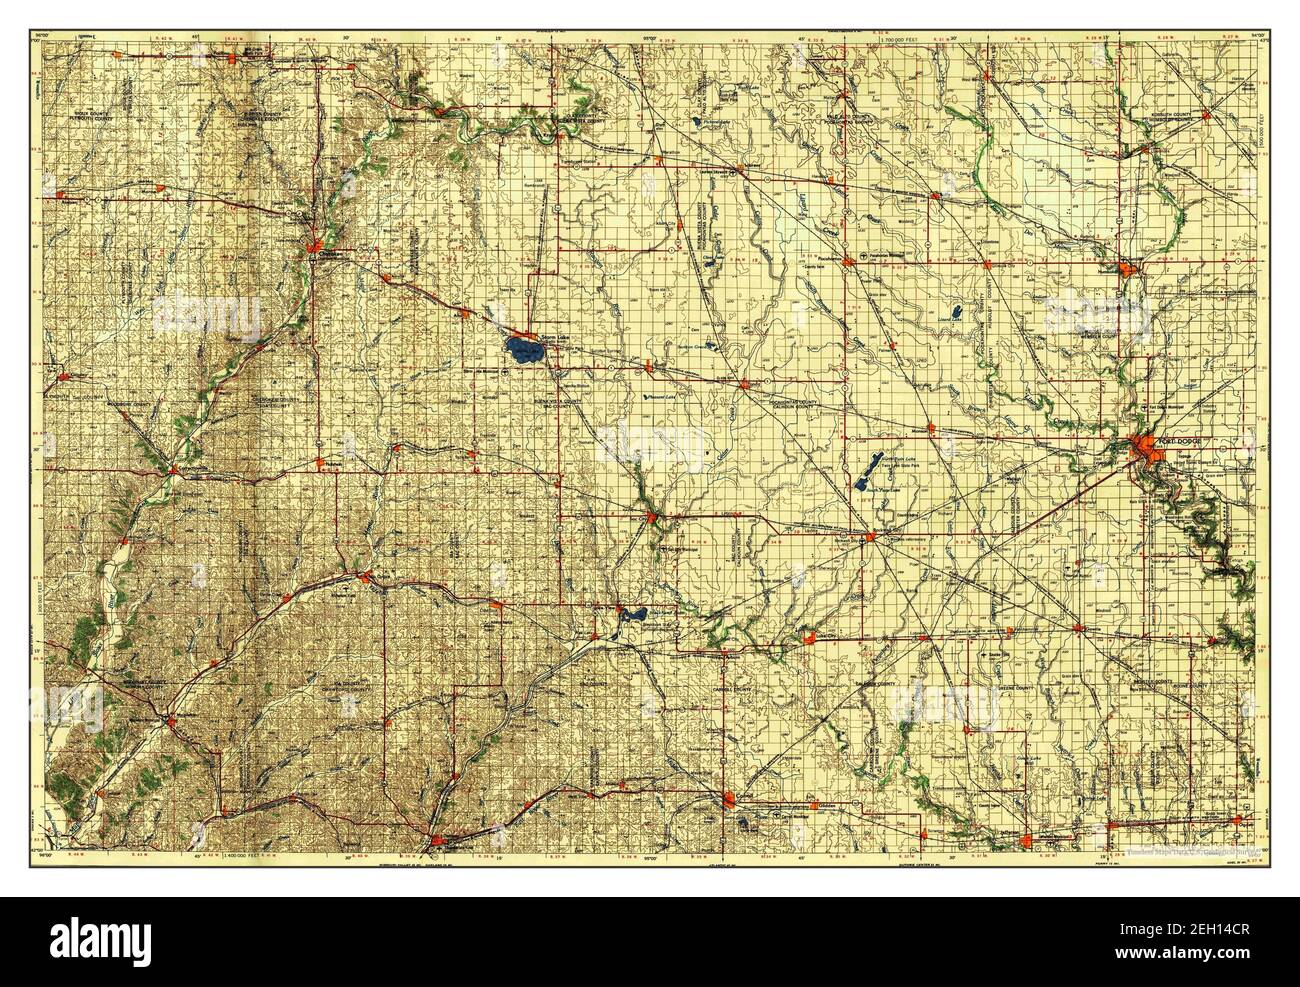 Fort Dodge, Iowa, map 1958, 1:250000, United States of America by Timeless Maps, data U.S. Geological Survey Stock Photo